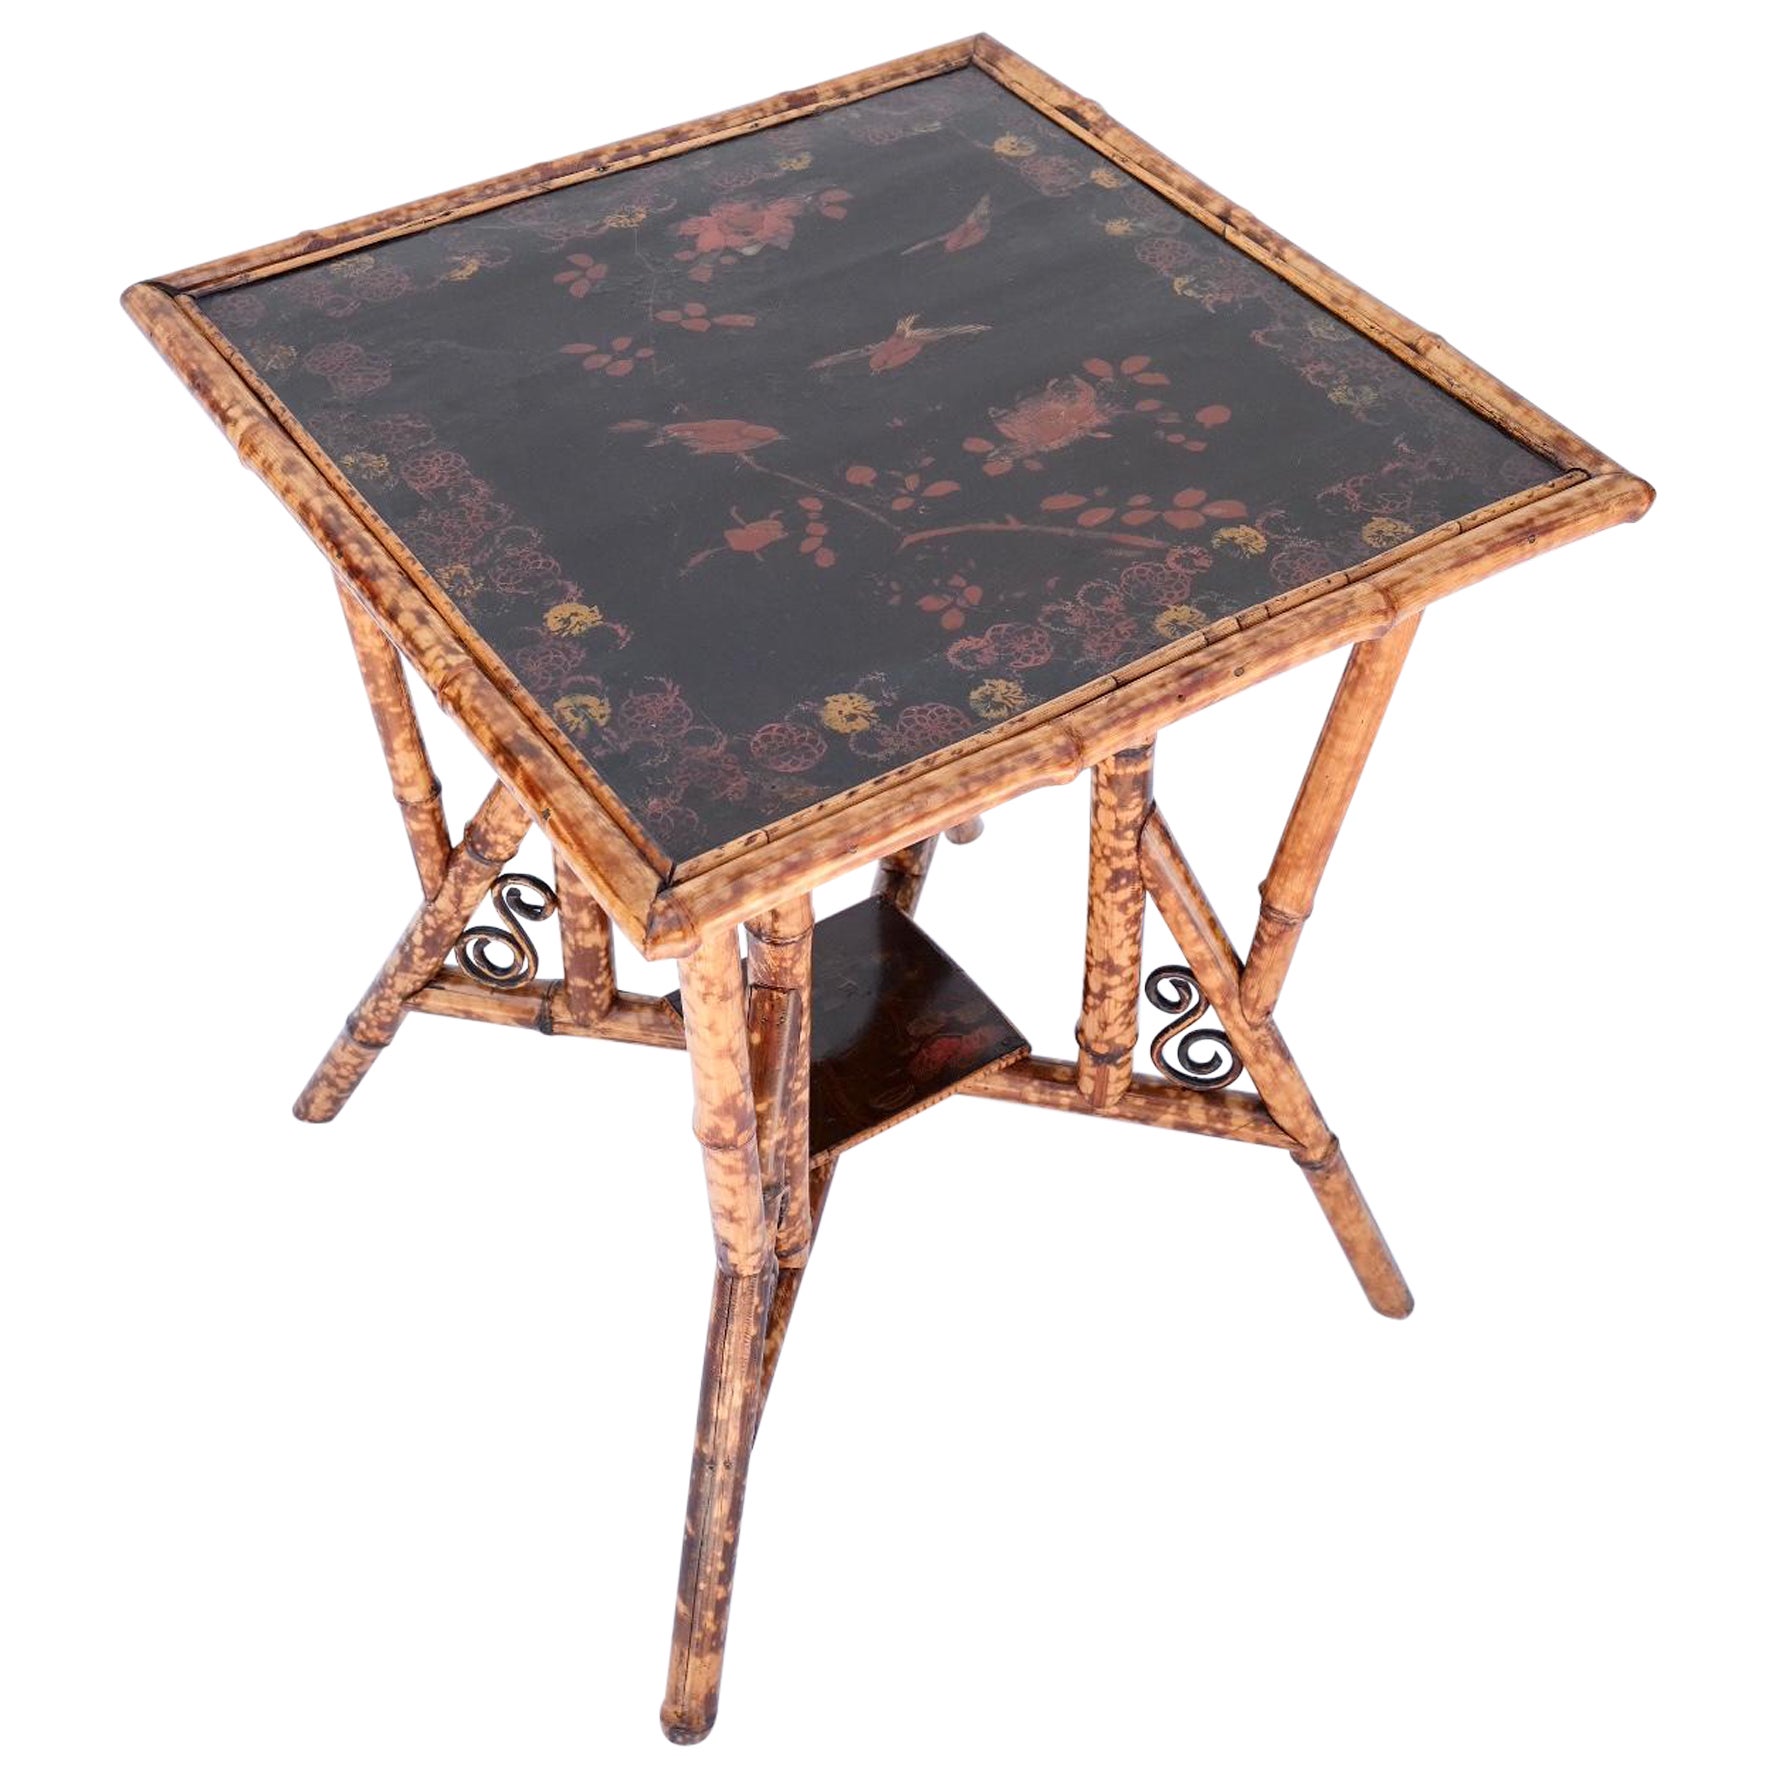 19th Century English Bamboo Square Occasional Table